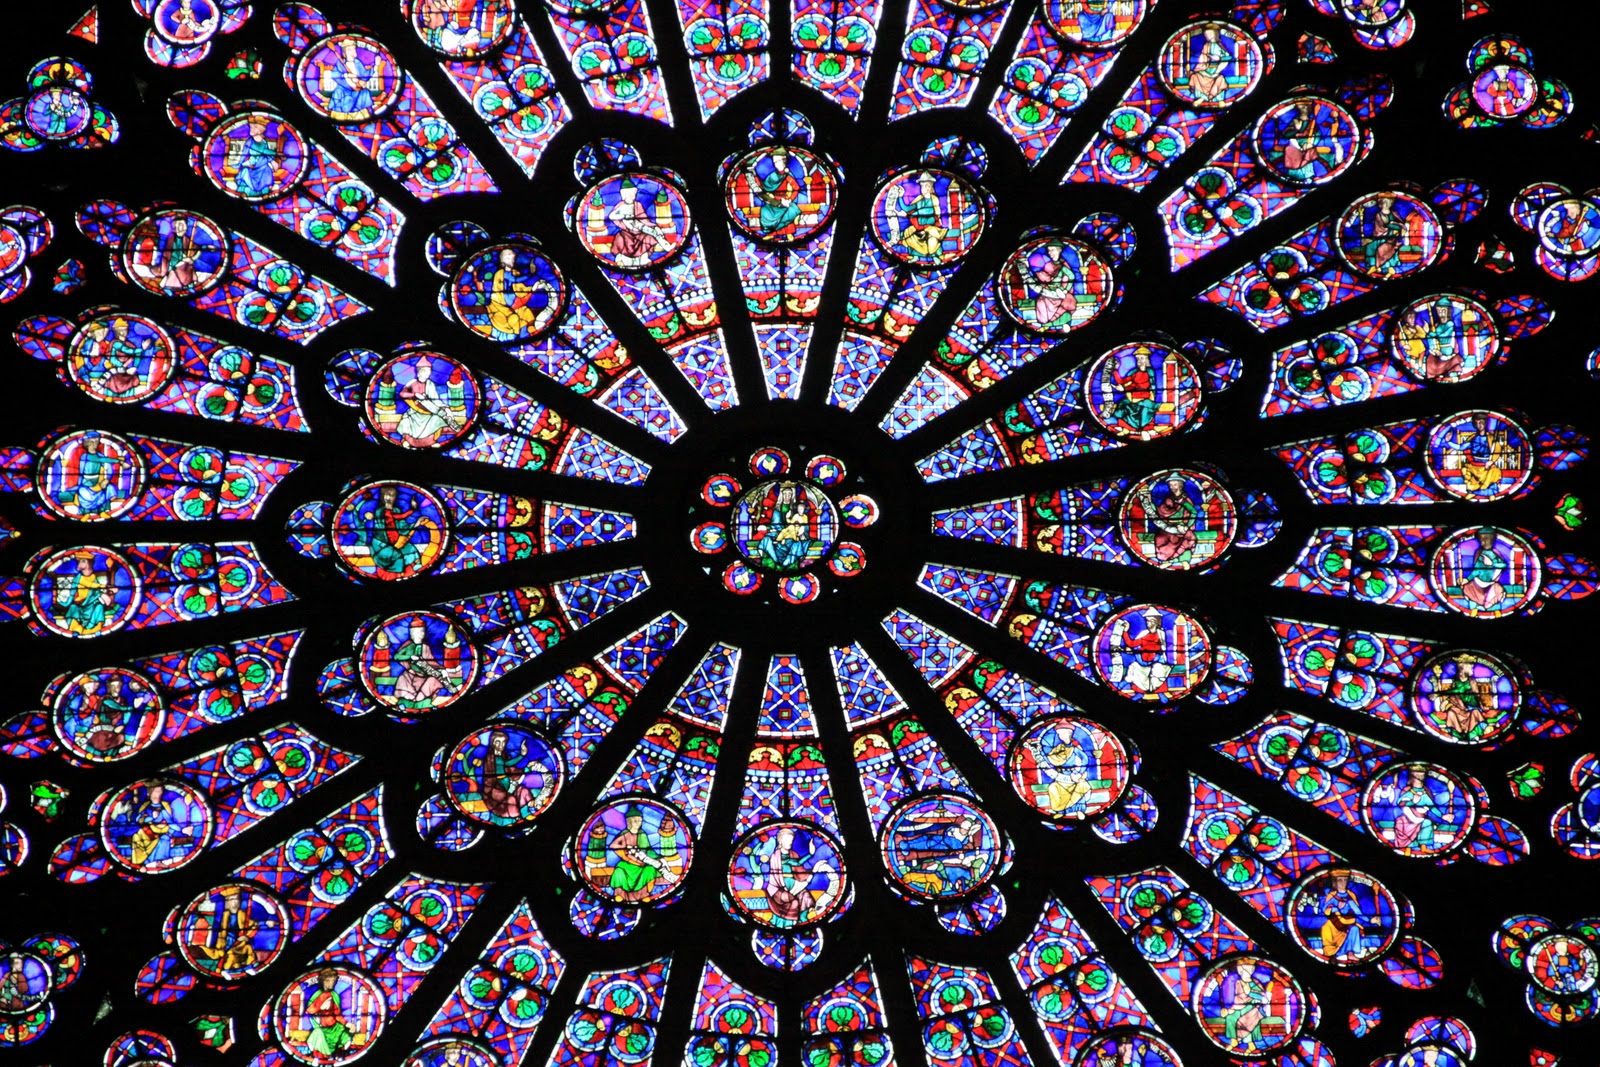 stained glass, religious, notre dame de paris, cathedral, colors, design, cathedrals